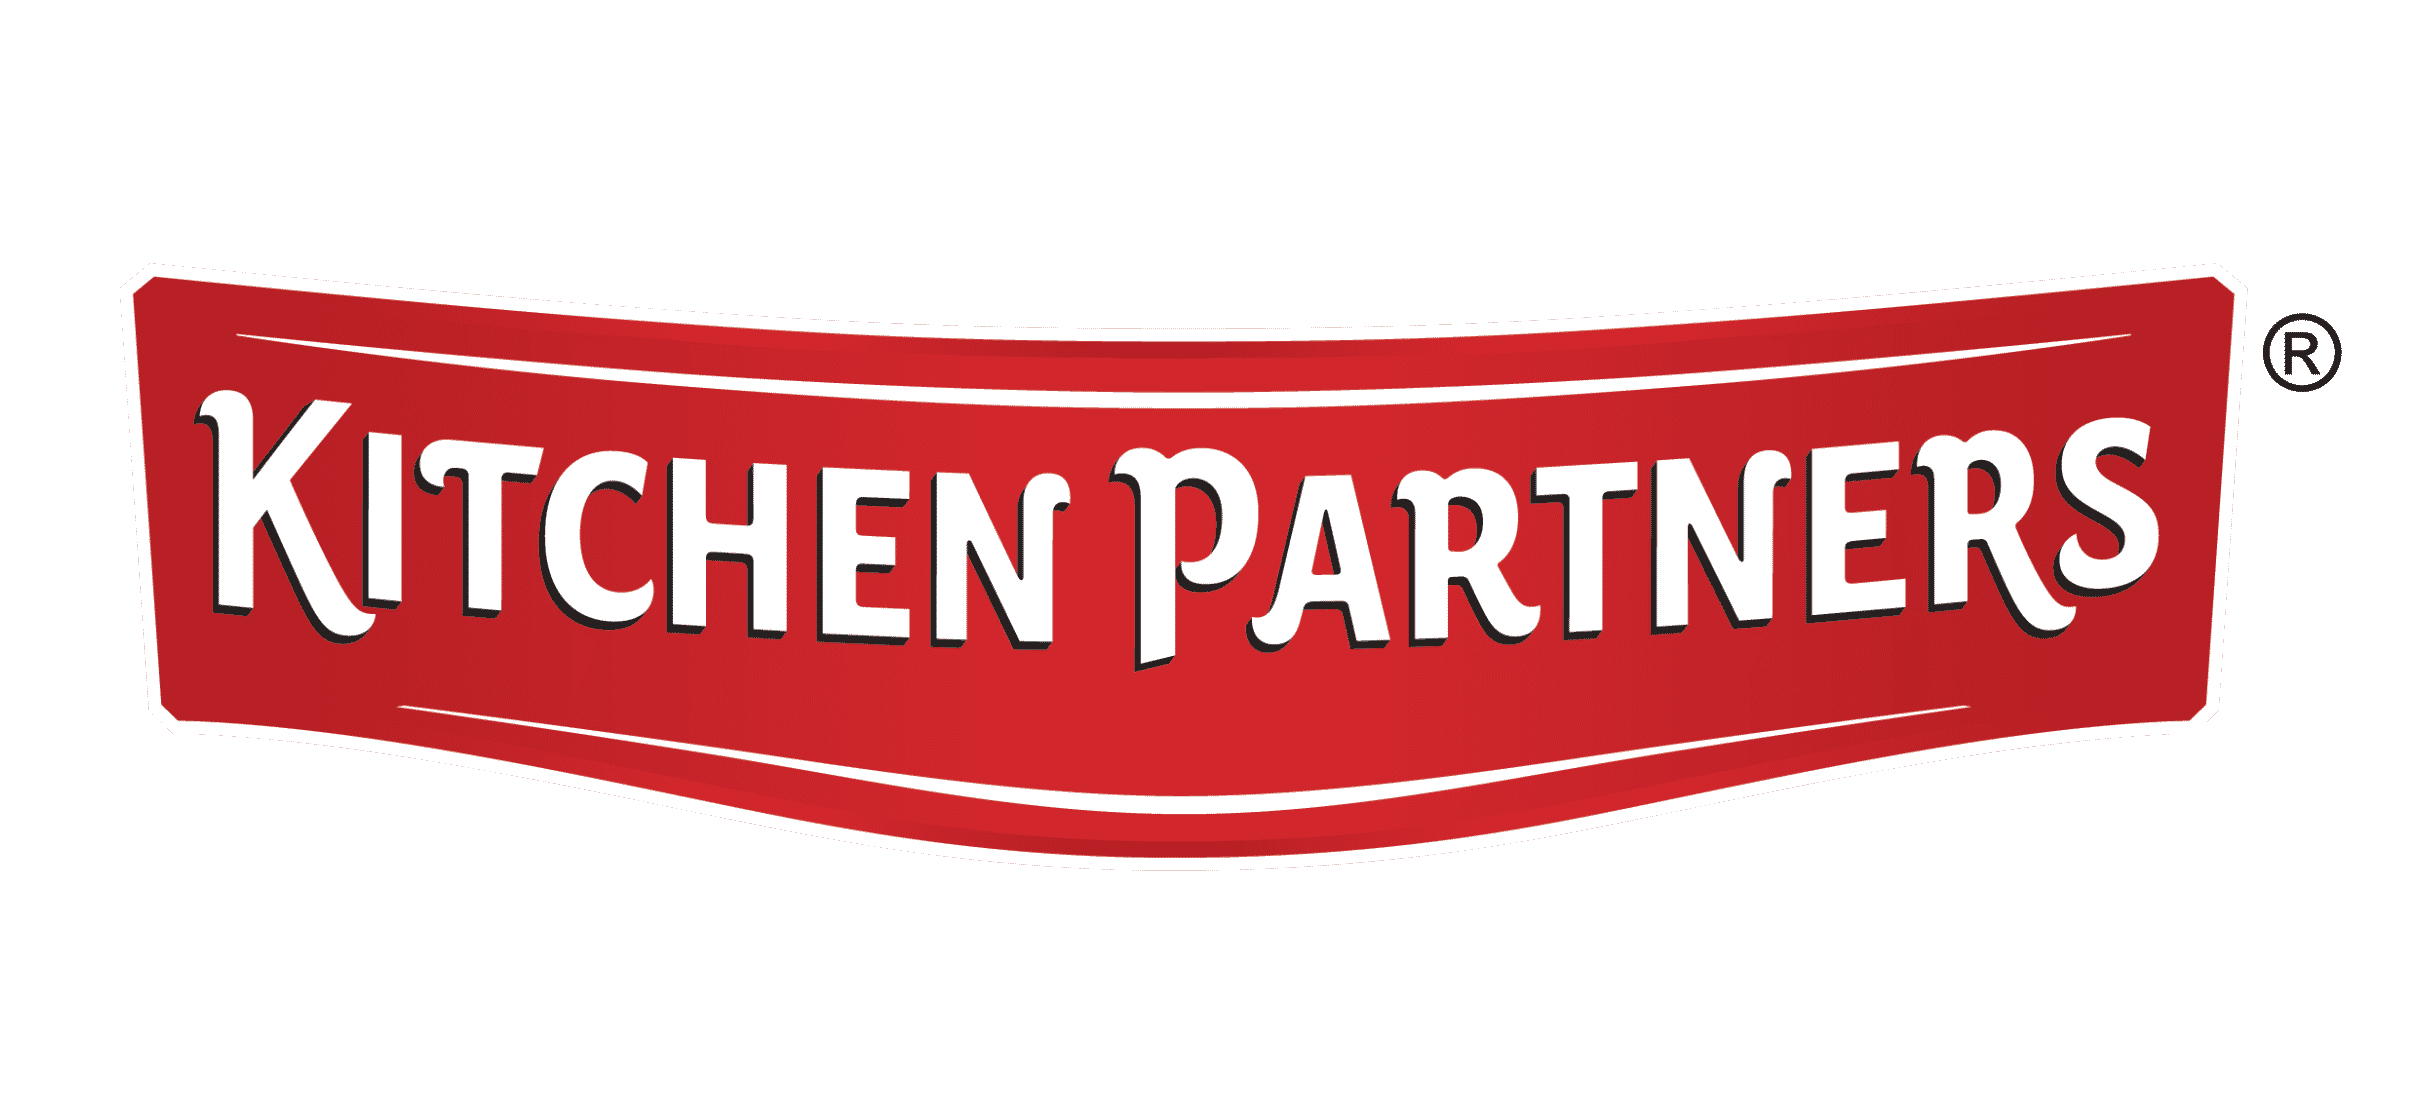 Kitchen Partners Logo. Red banner with white text.